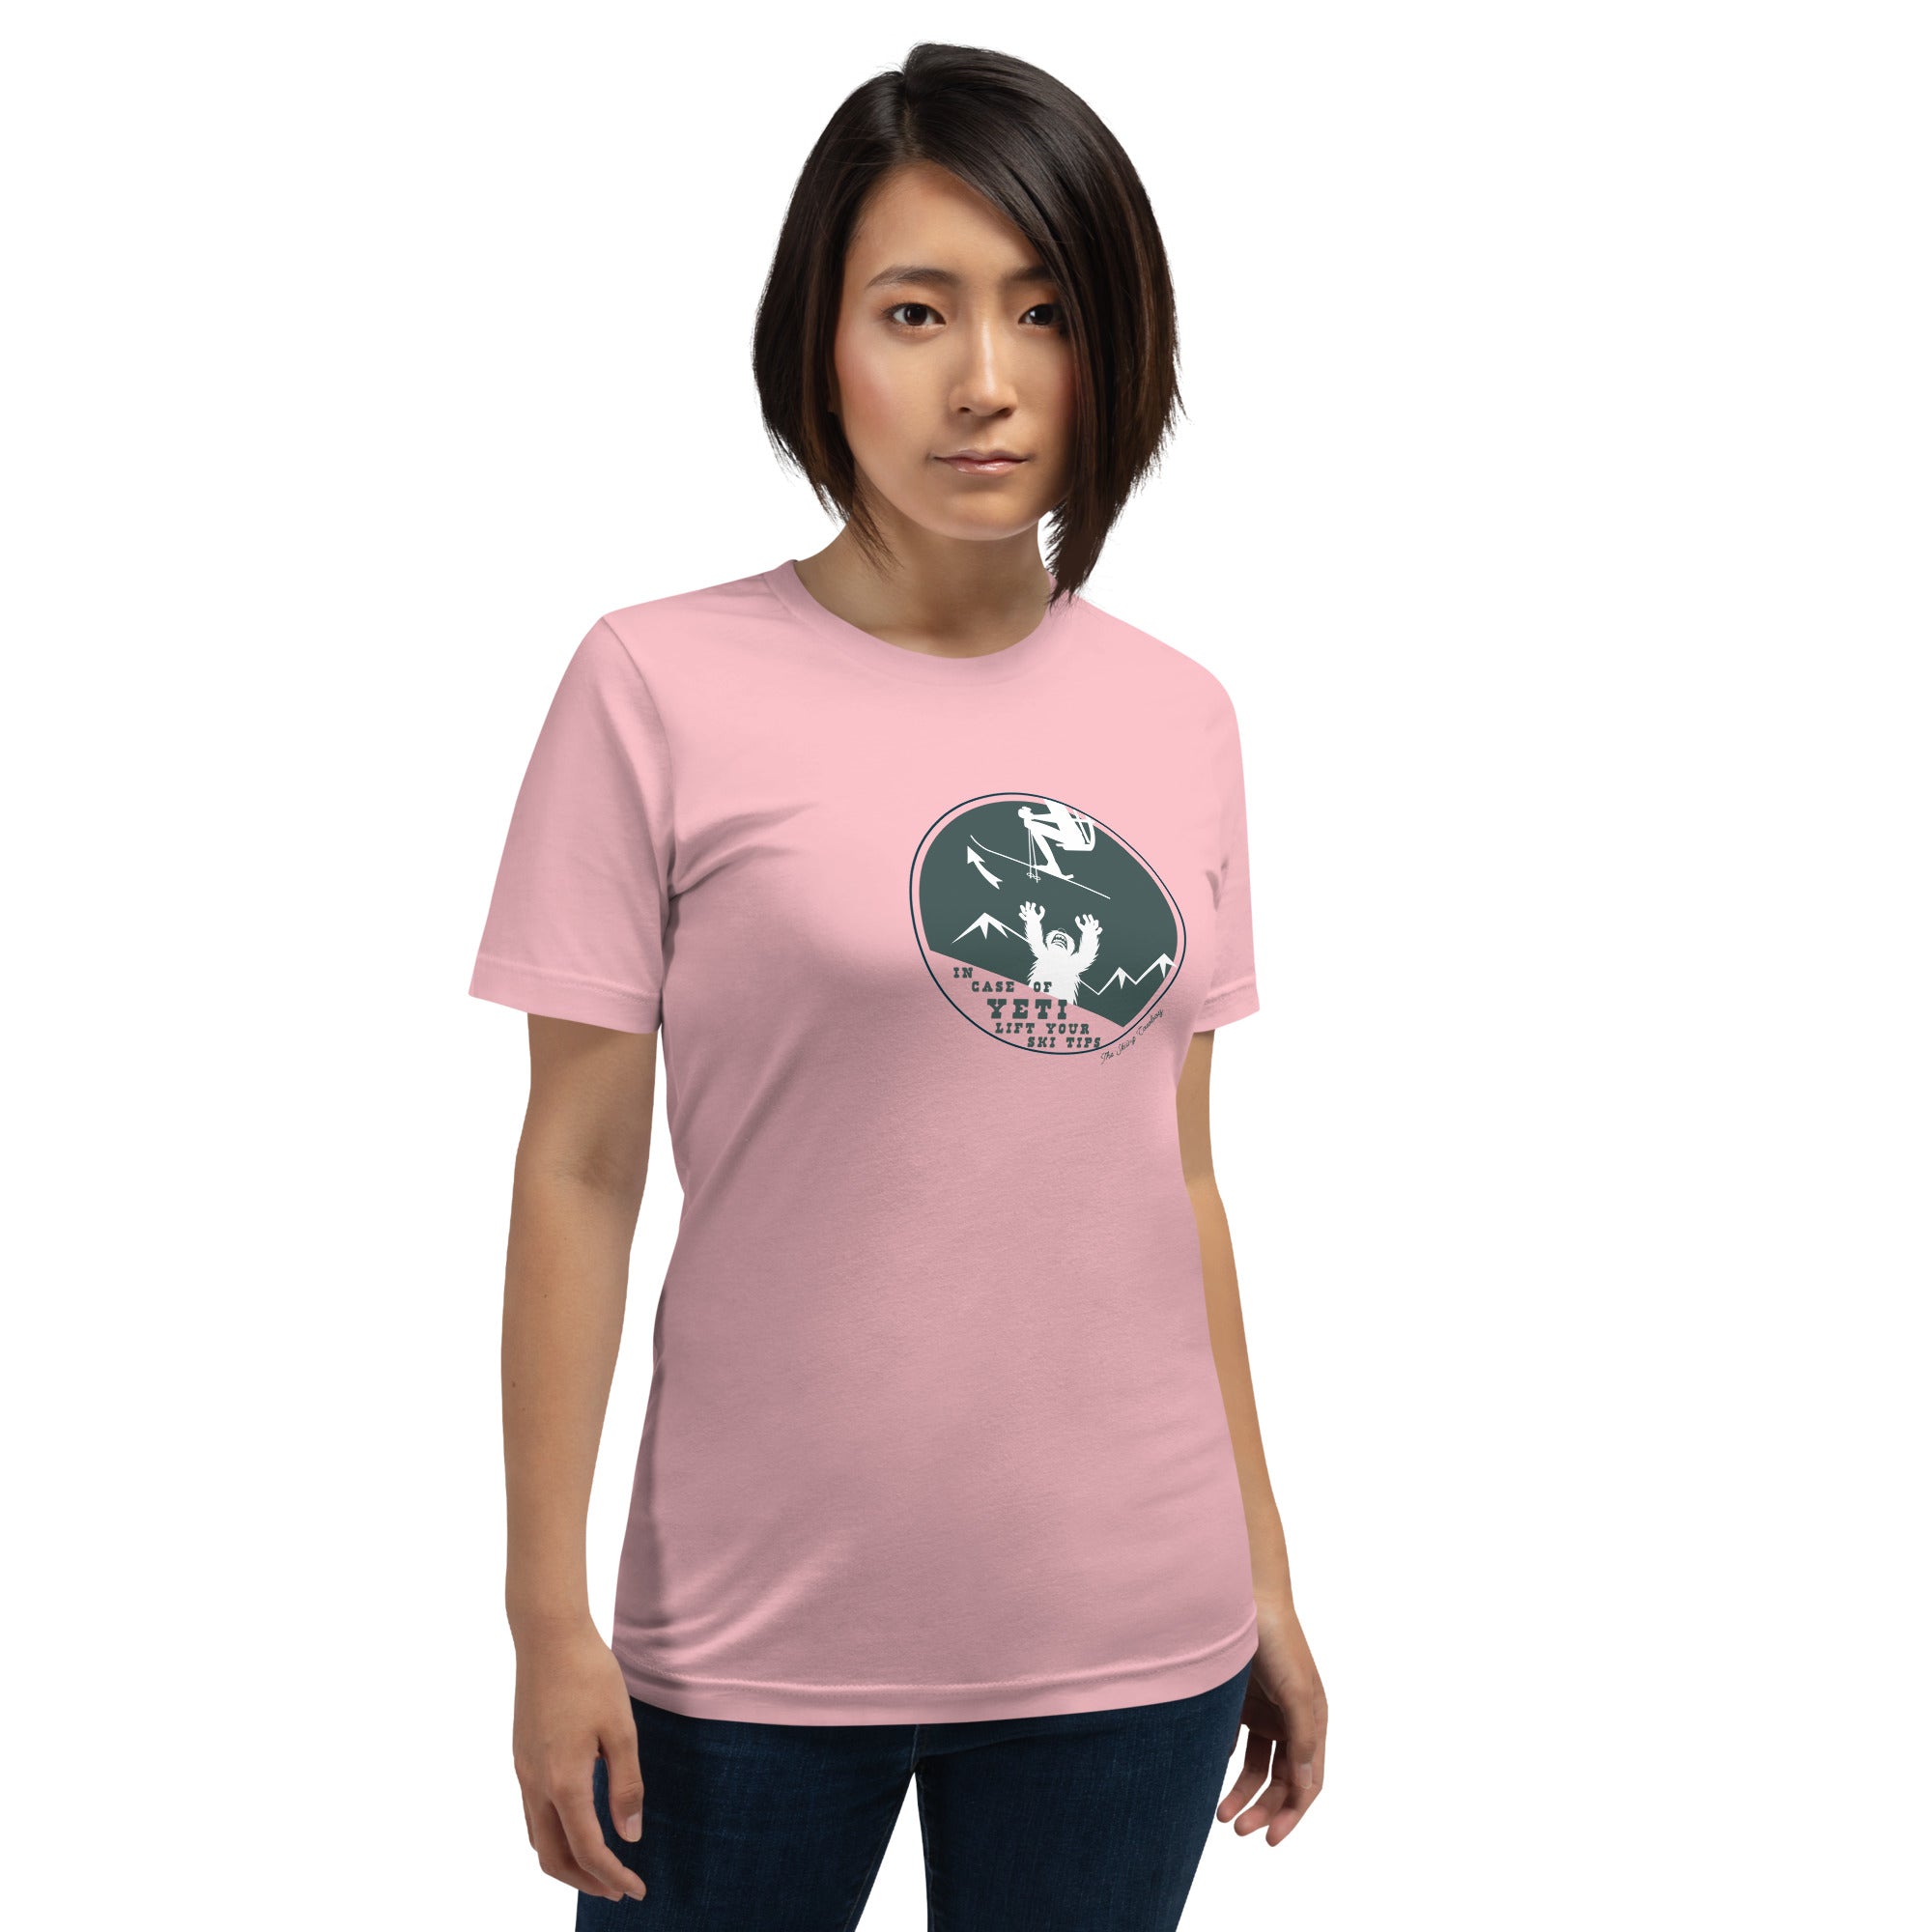 Unisex cotton t-shirt In case of Yeti, lift your ski tips on light colors